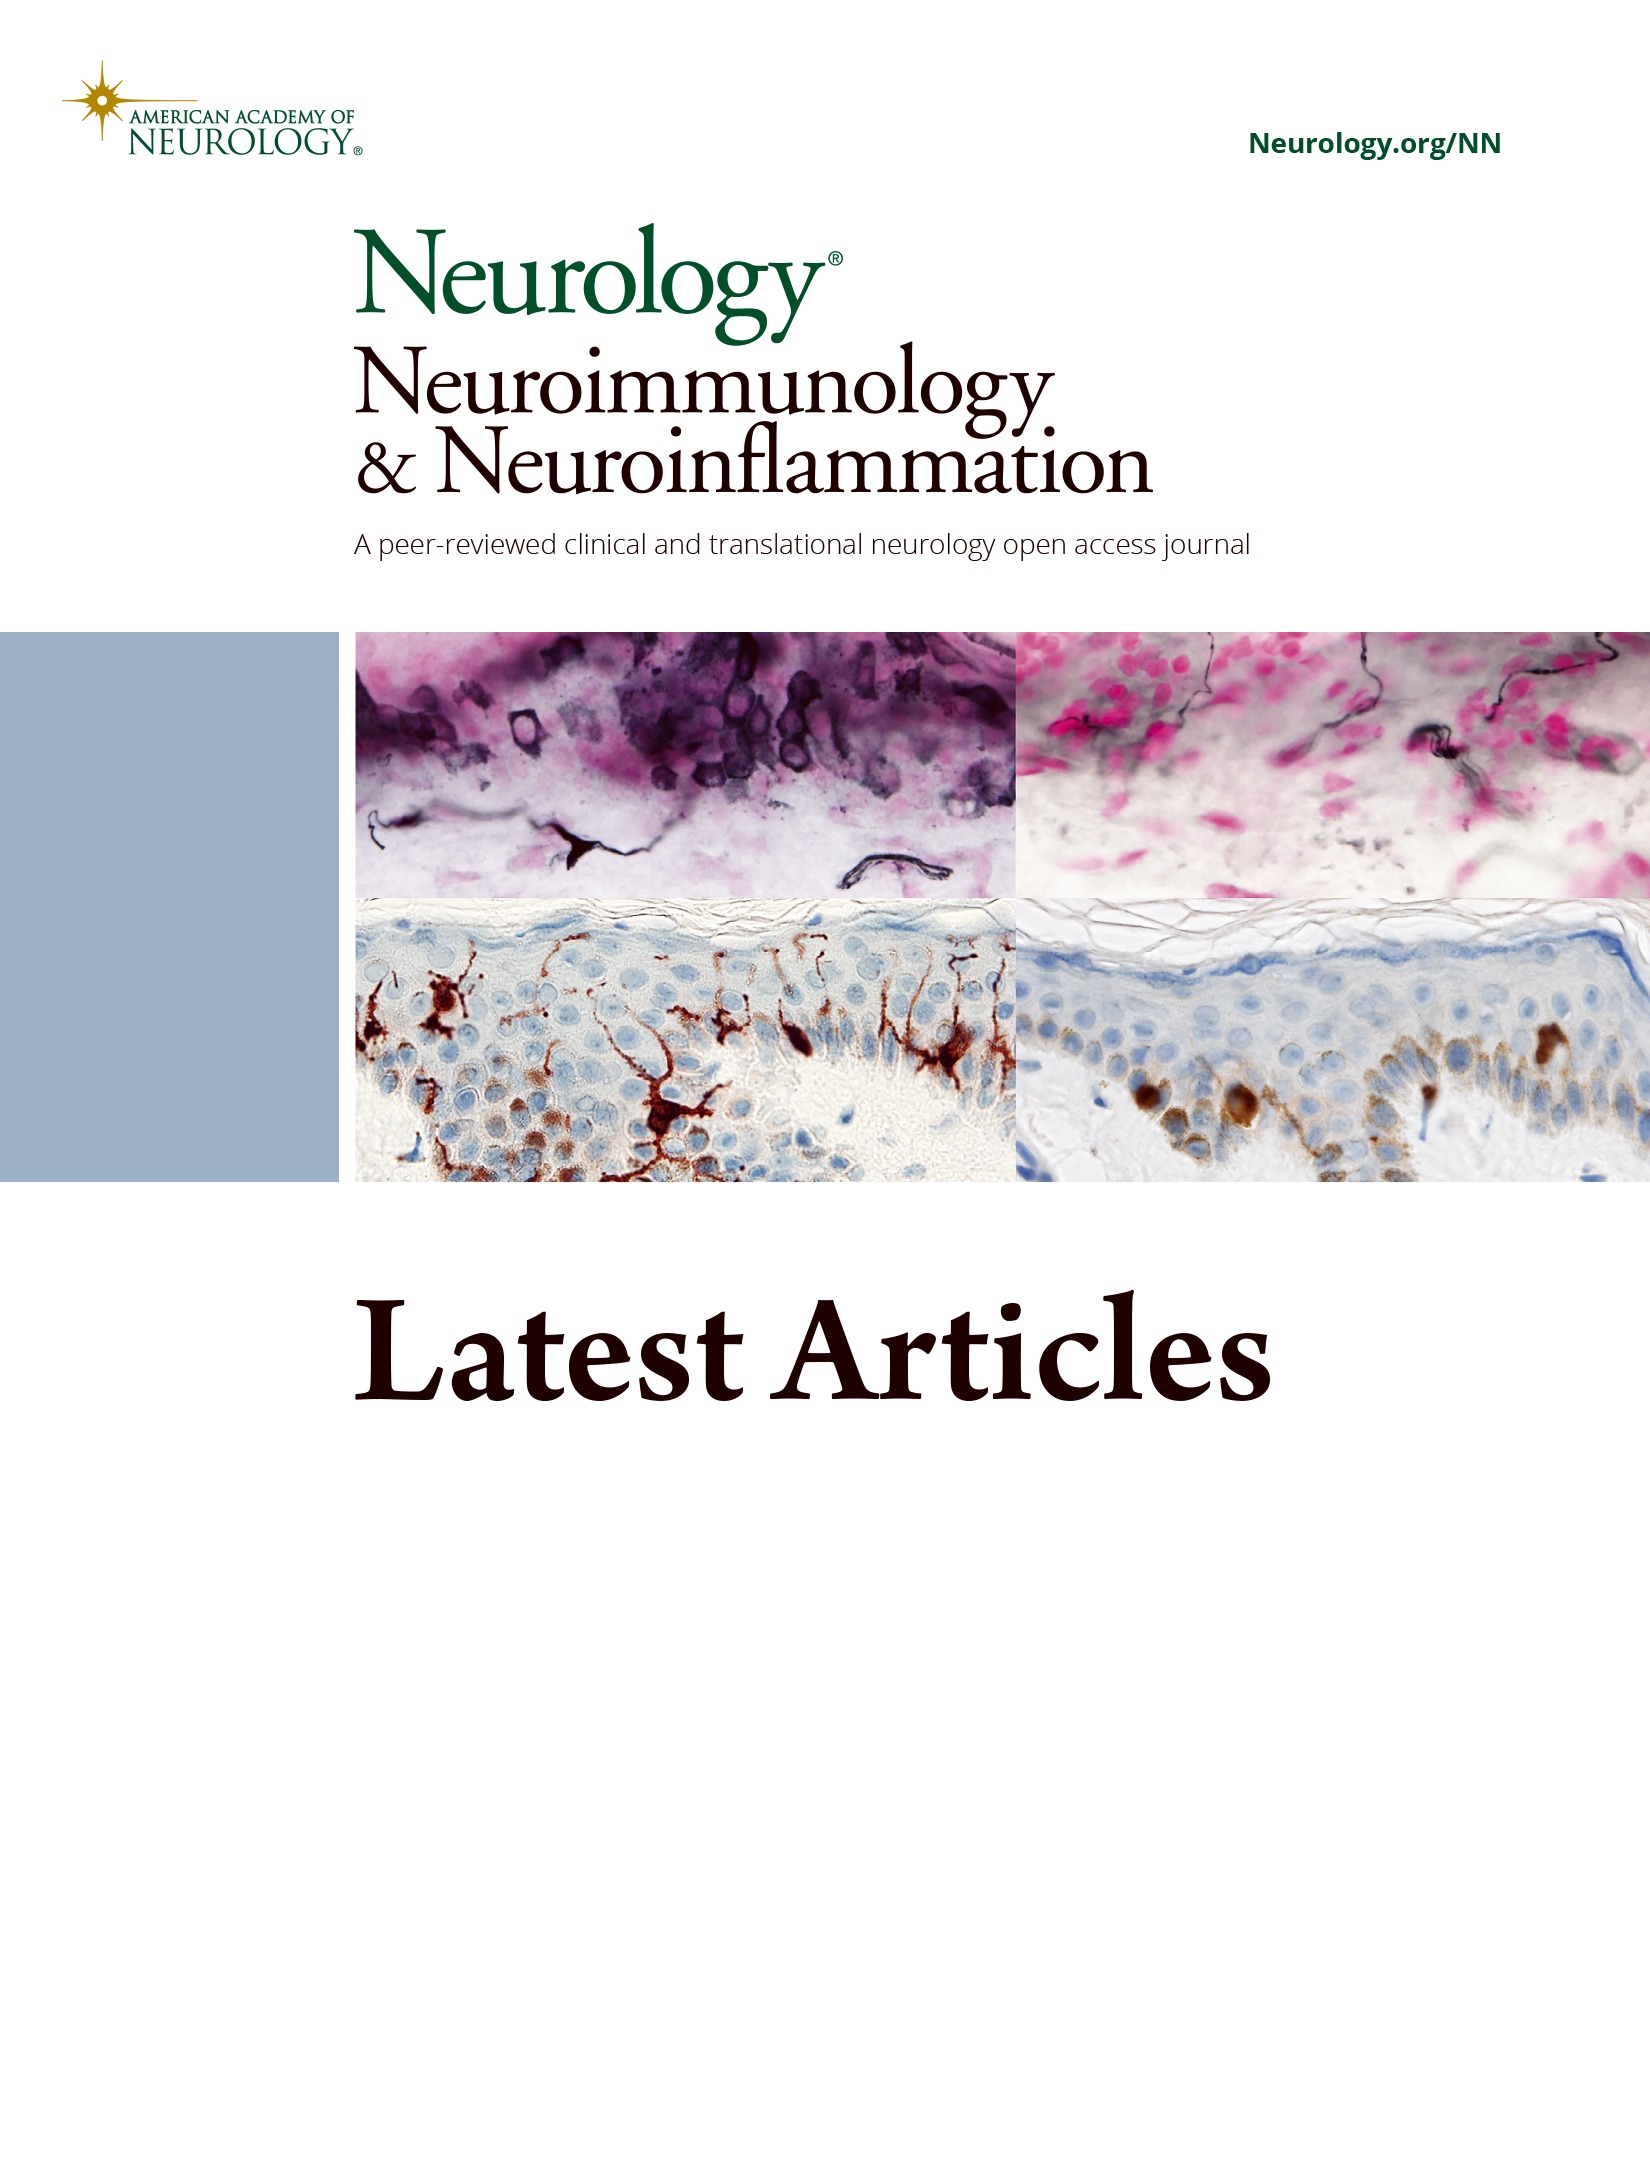 Severe Neuroinvasive West Nile Virus in Association With Anti-CD20 Monotherapy for Multiple Sclerosis